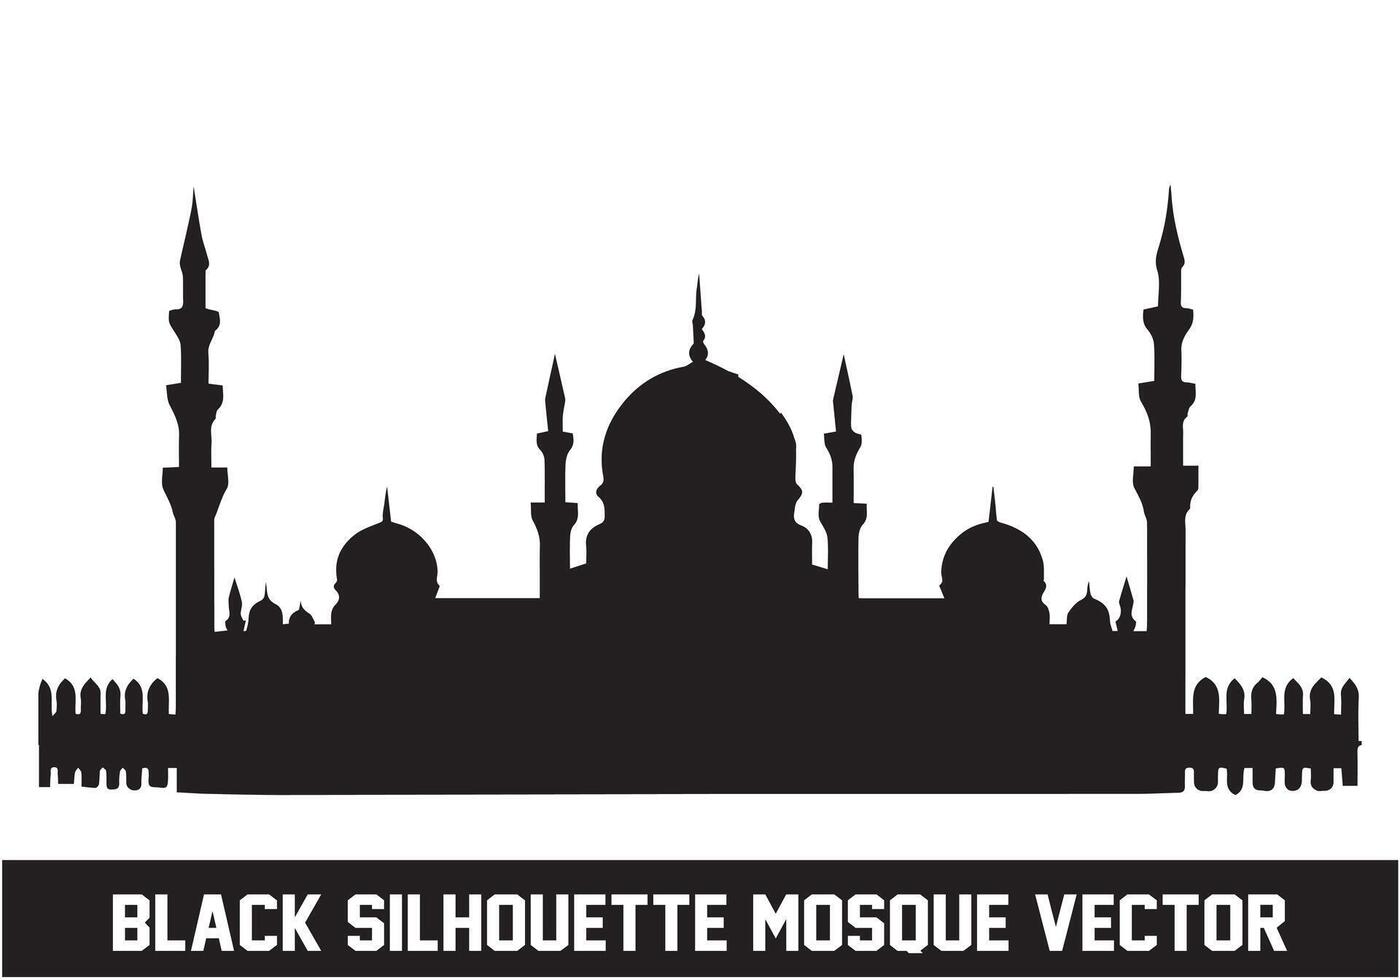 Mosque silhouette bundle white background vector